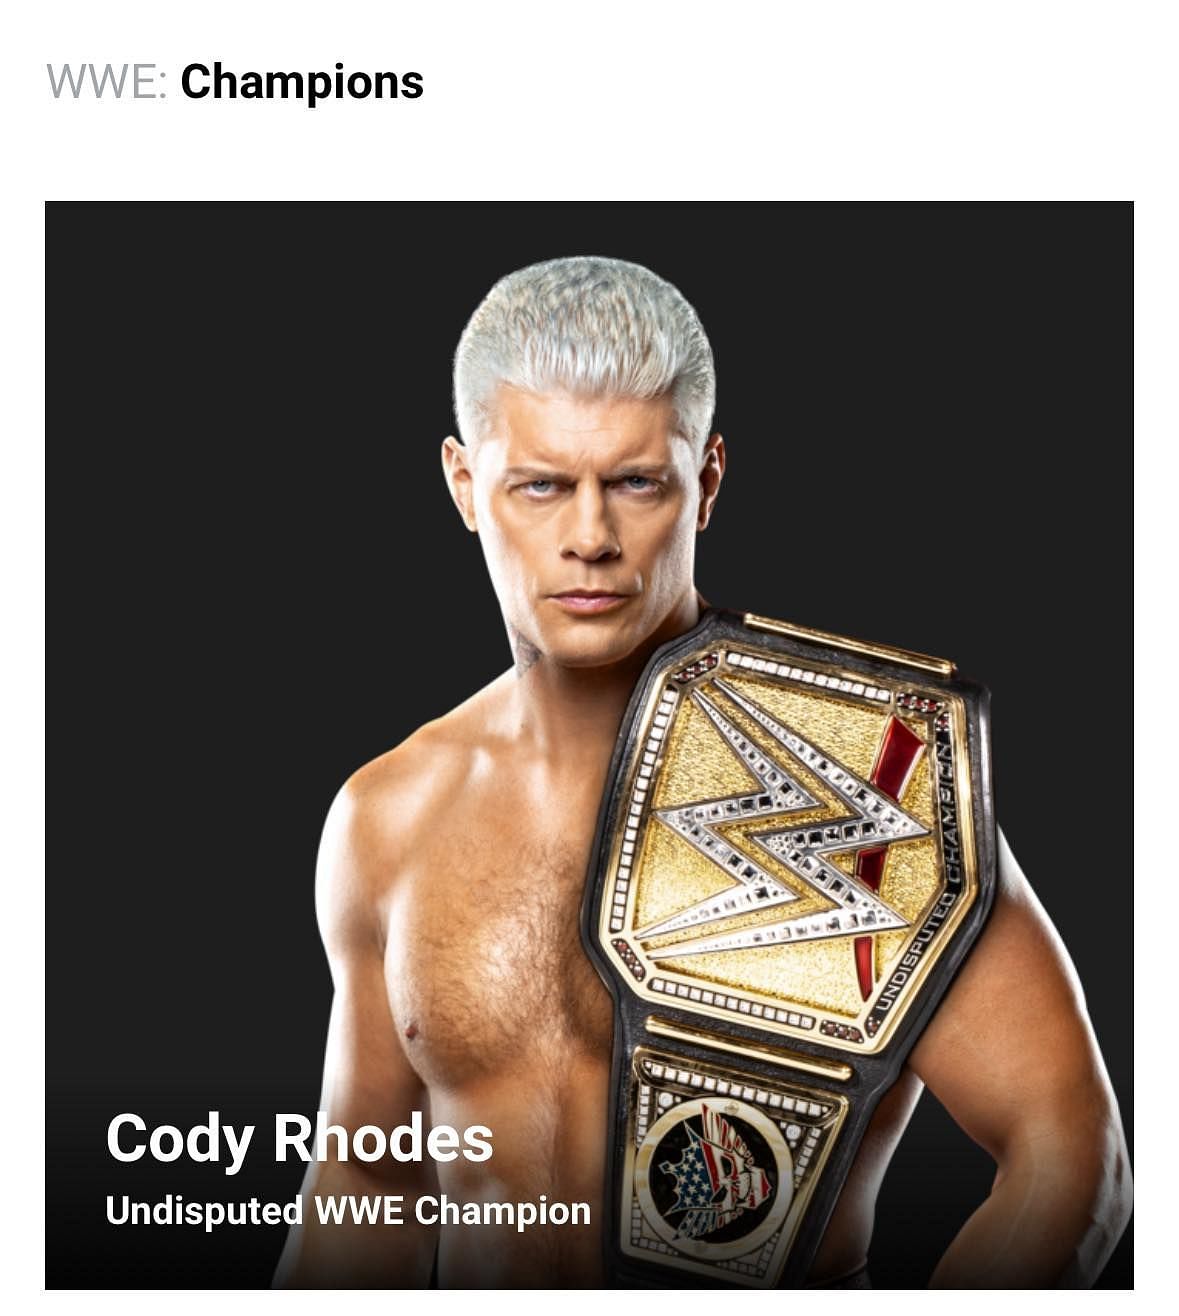 Cody Rhodes is the new Undisputed WWE Champion (photo: WWE.com)